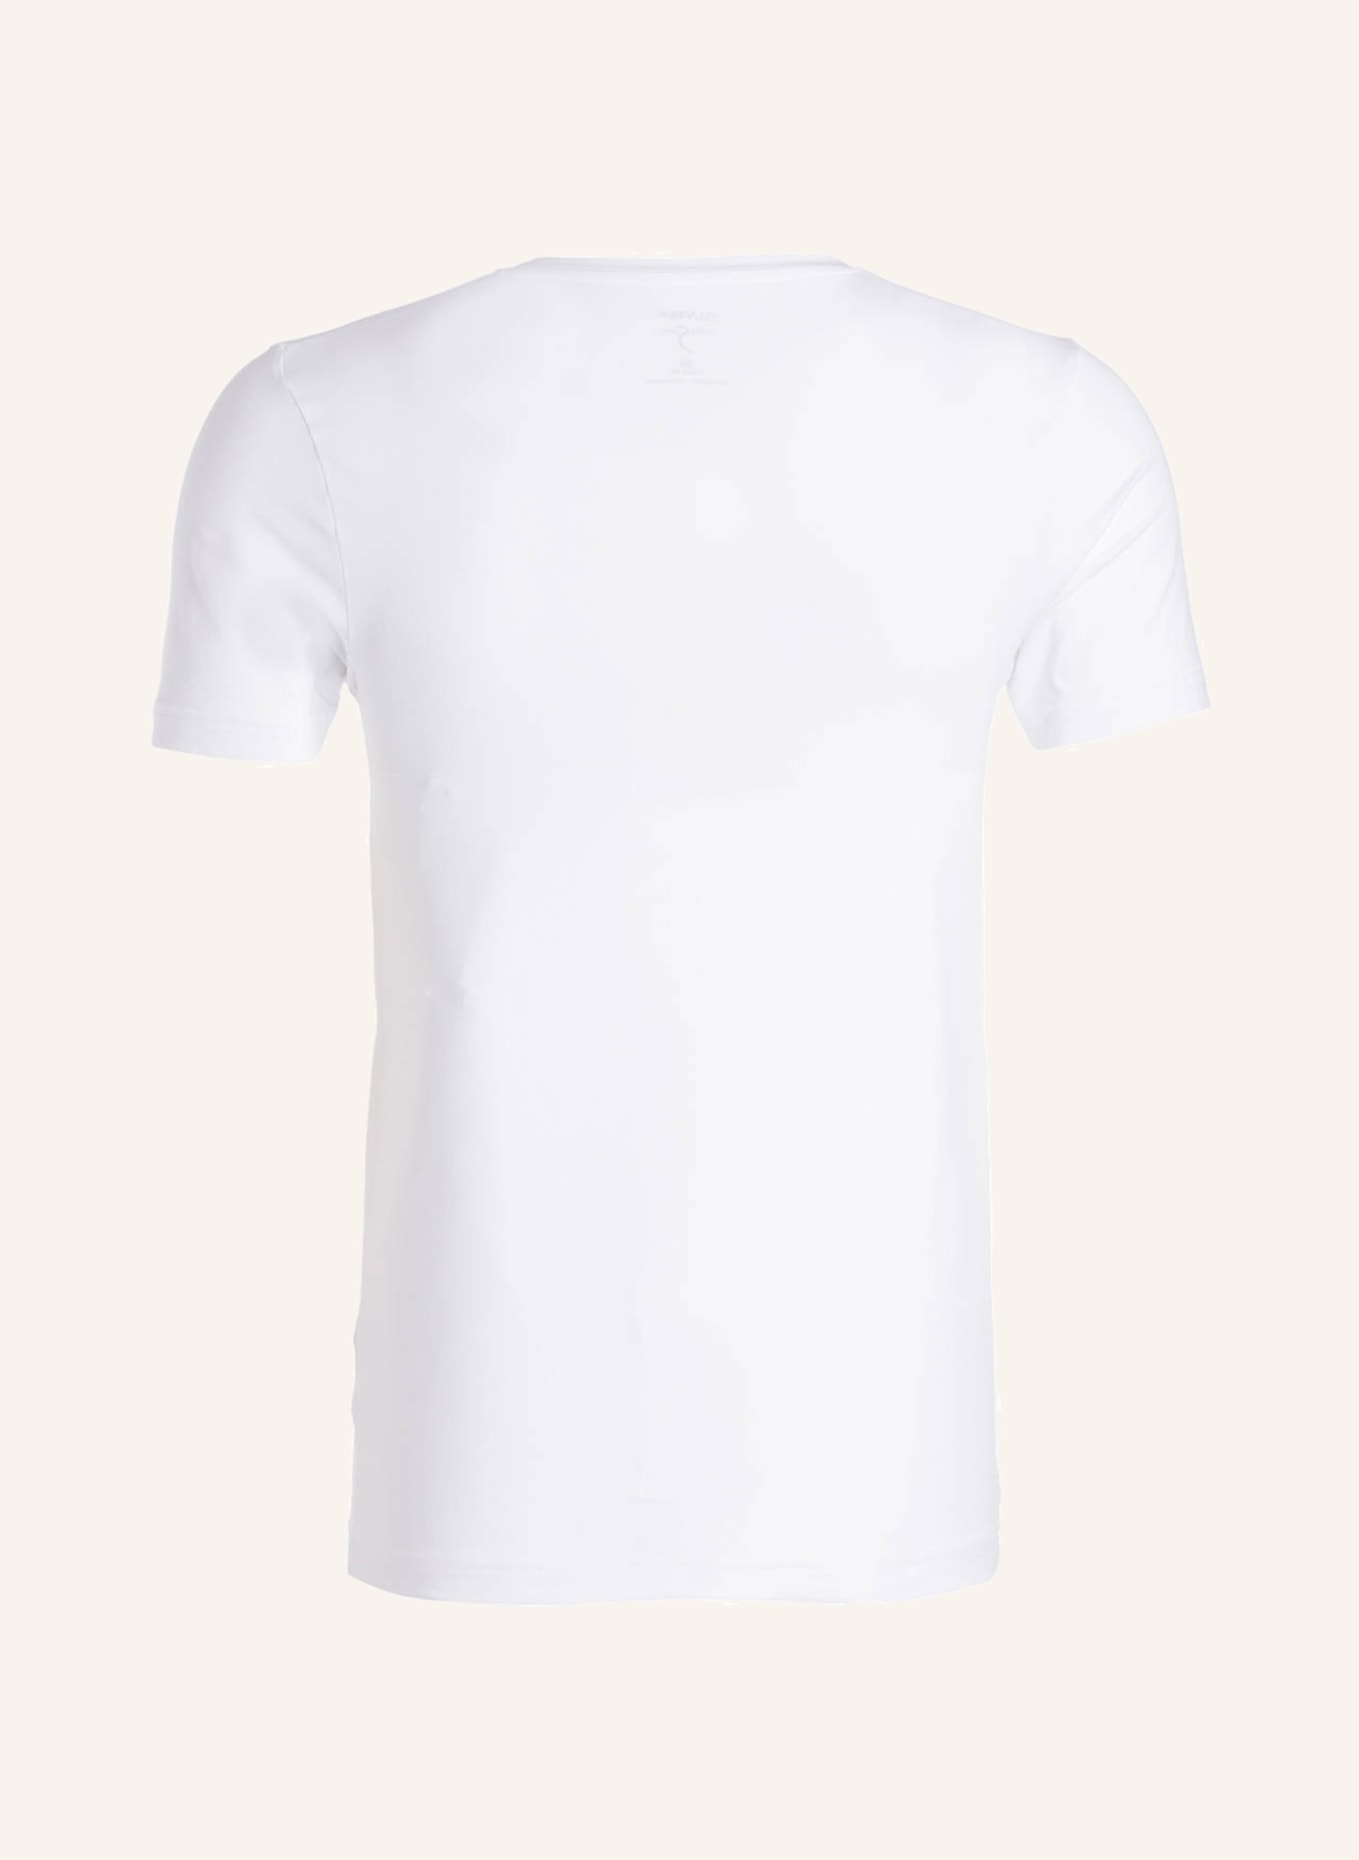 Level fit body Five in OLYMP weiss T-Shirt